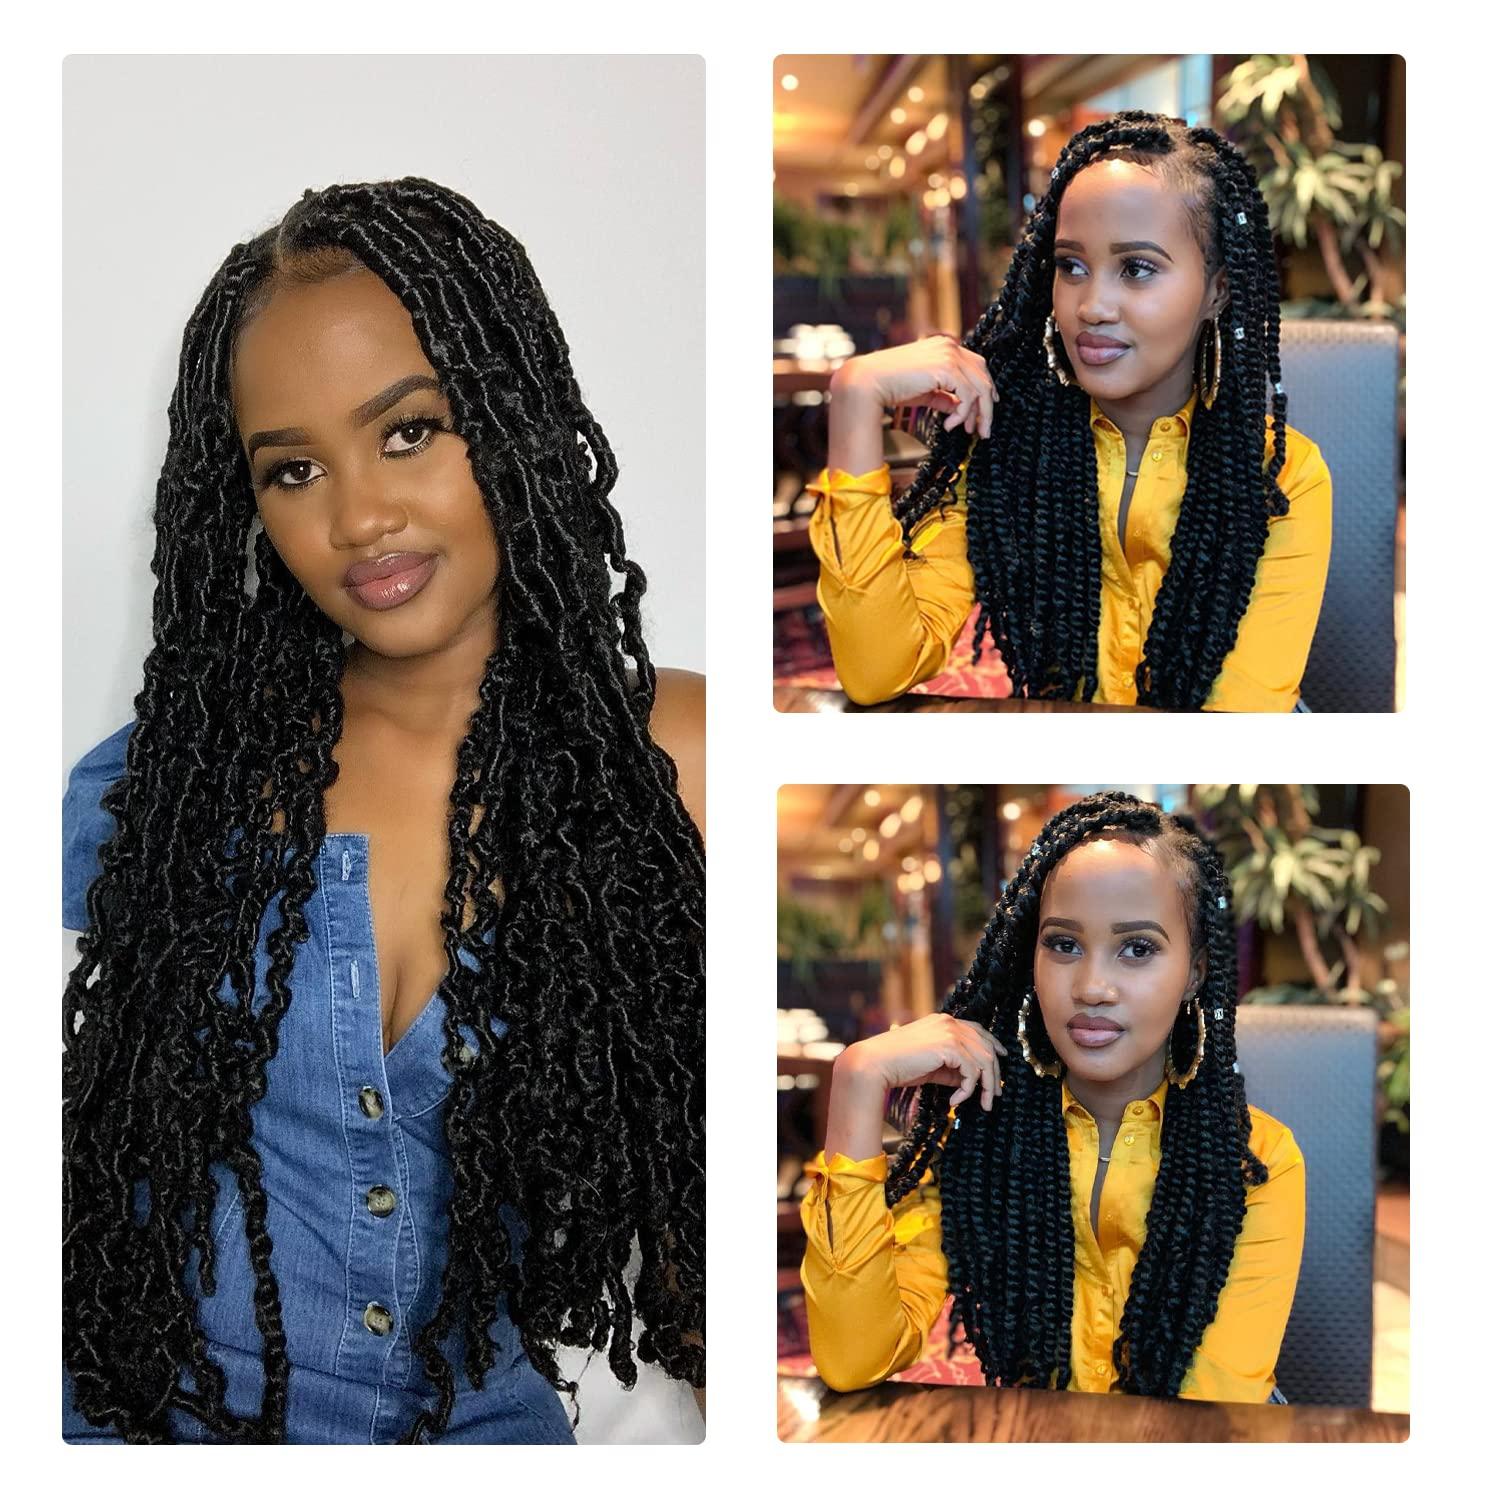 Fauxlocs with Brazilian Wool styled by HAIRXETERA.  Coiling natural hair,  Bob braids hairstyles, Braided hairstyles